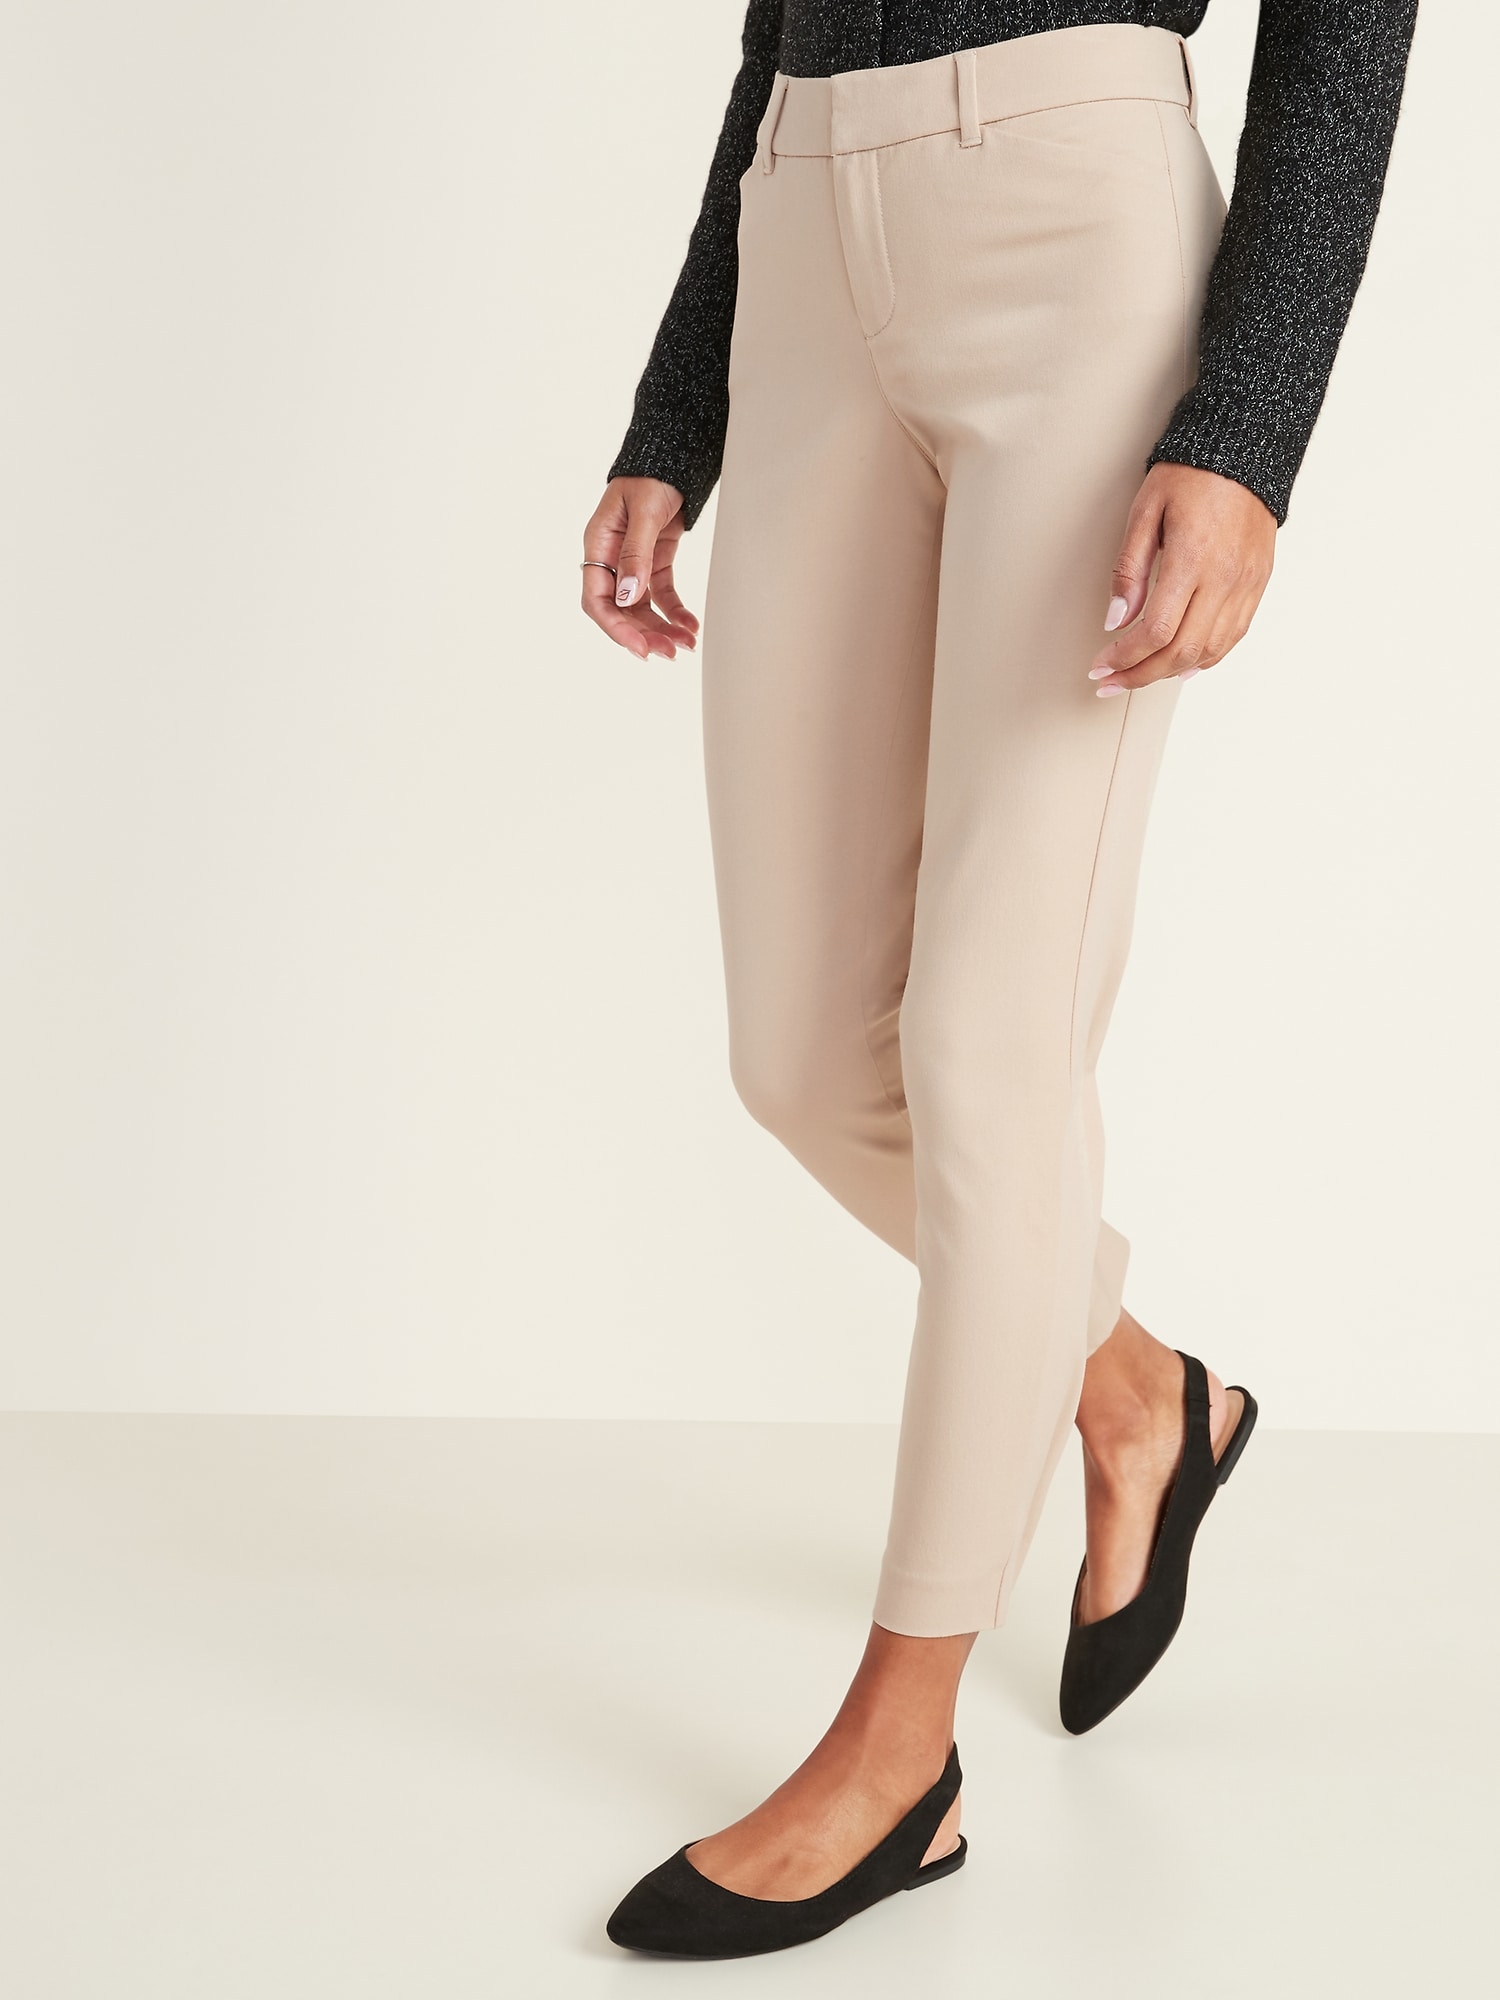 All-New Mid-Rise Pixie Ankle Pants for Women